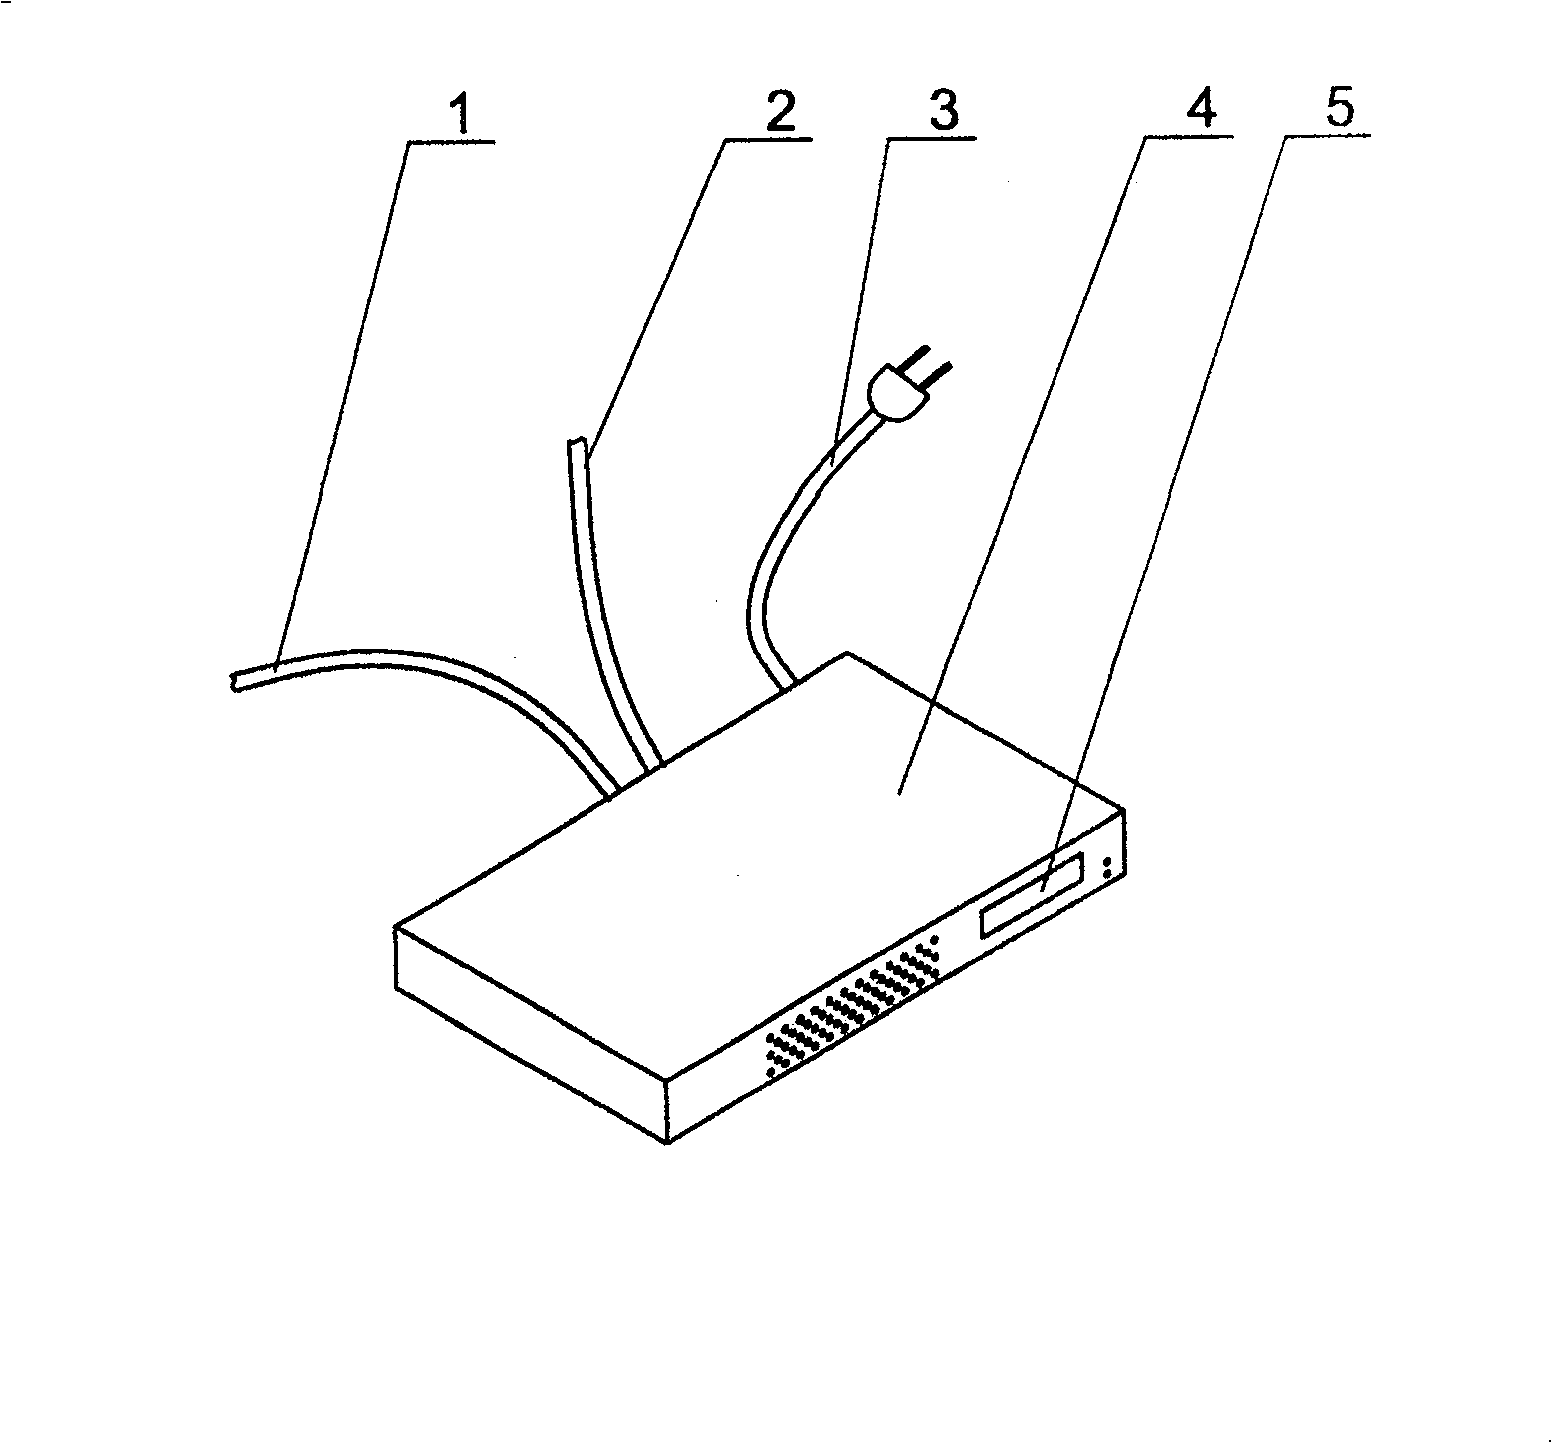 Multifunctional network application equipment and starting and online updating method